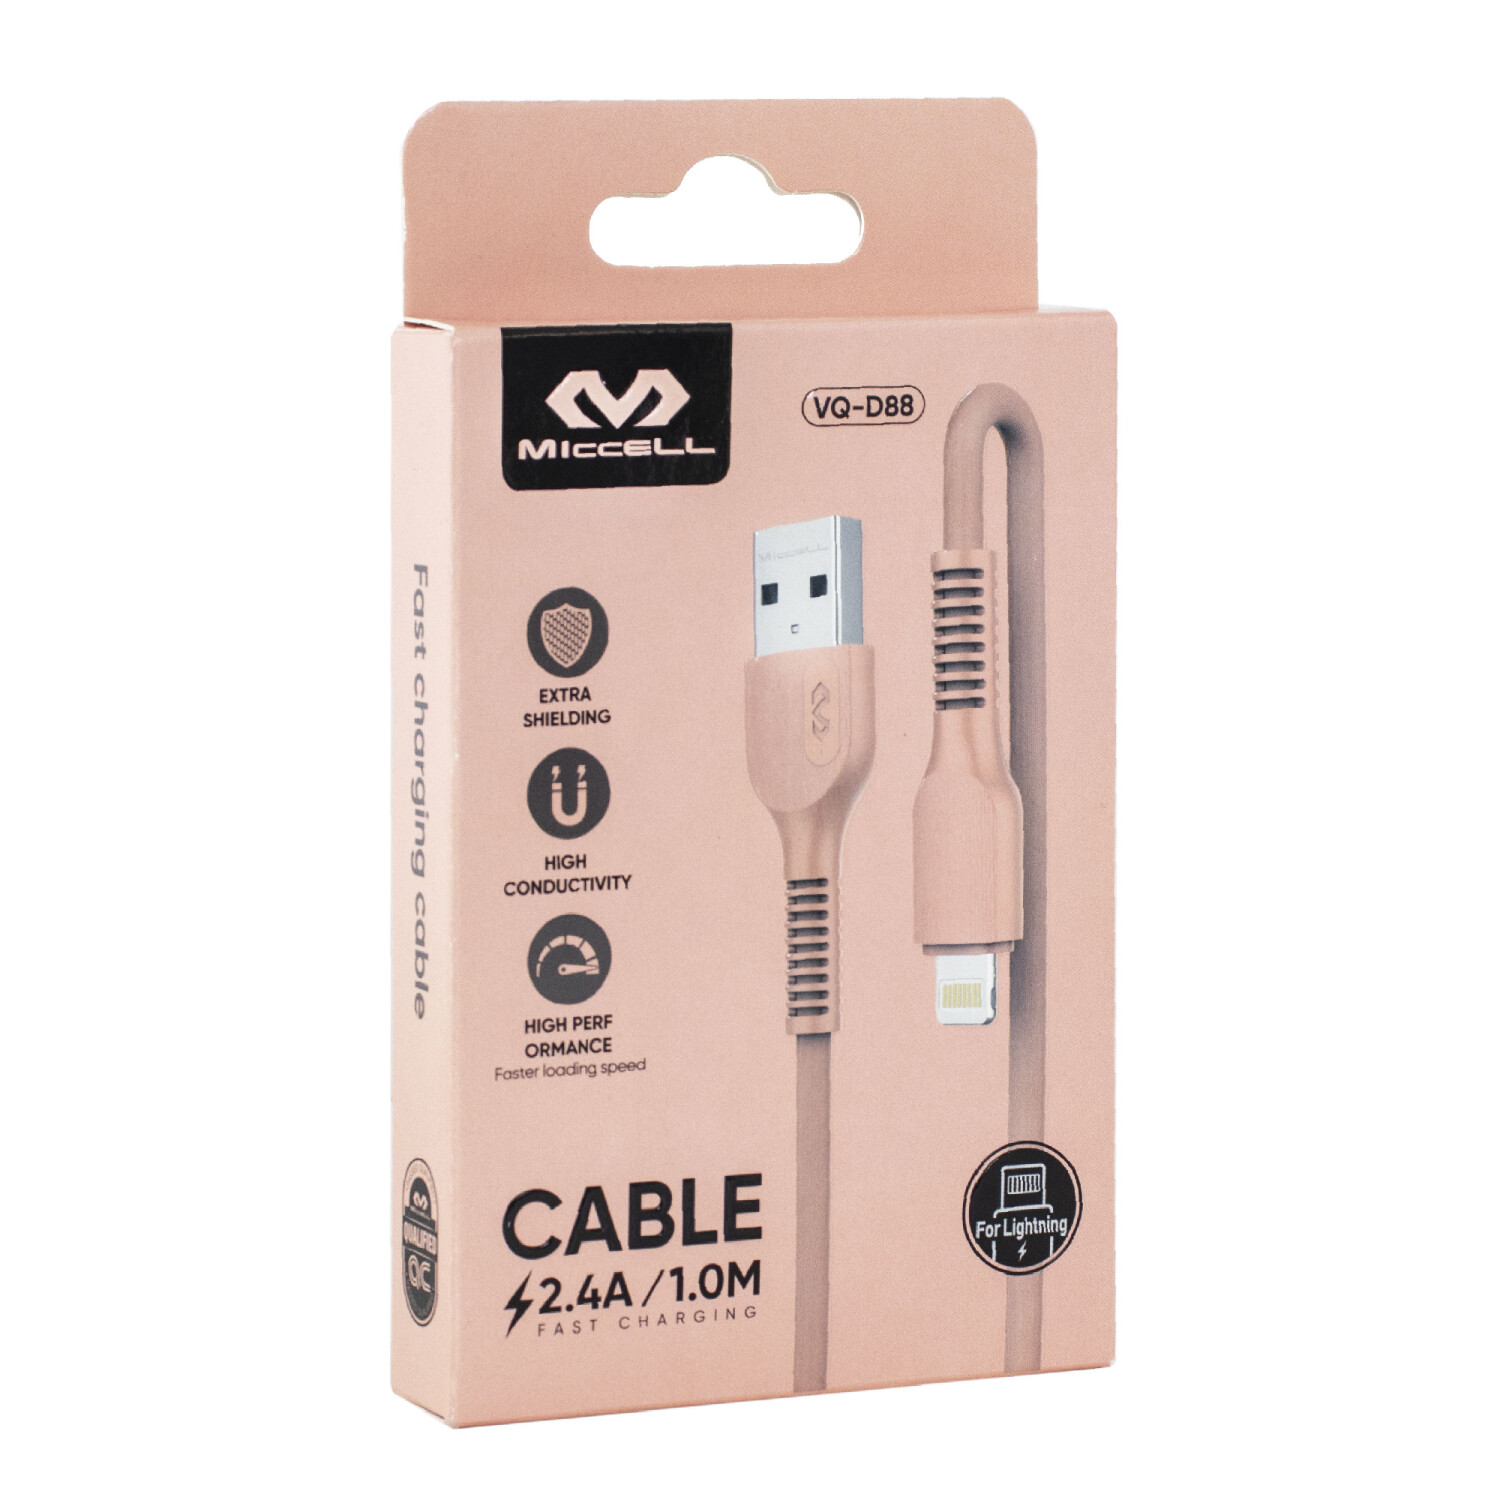 Cable para iphone